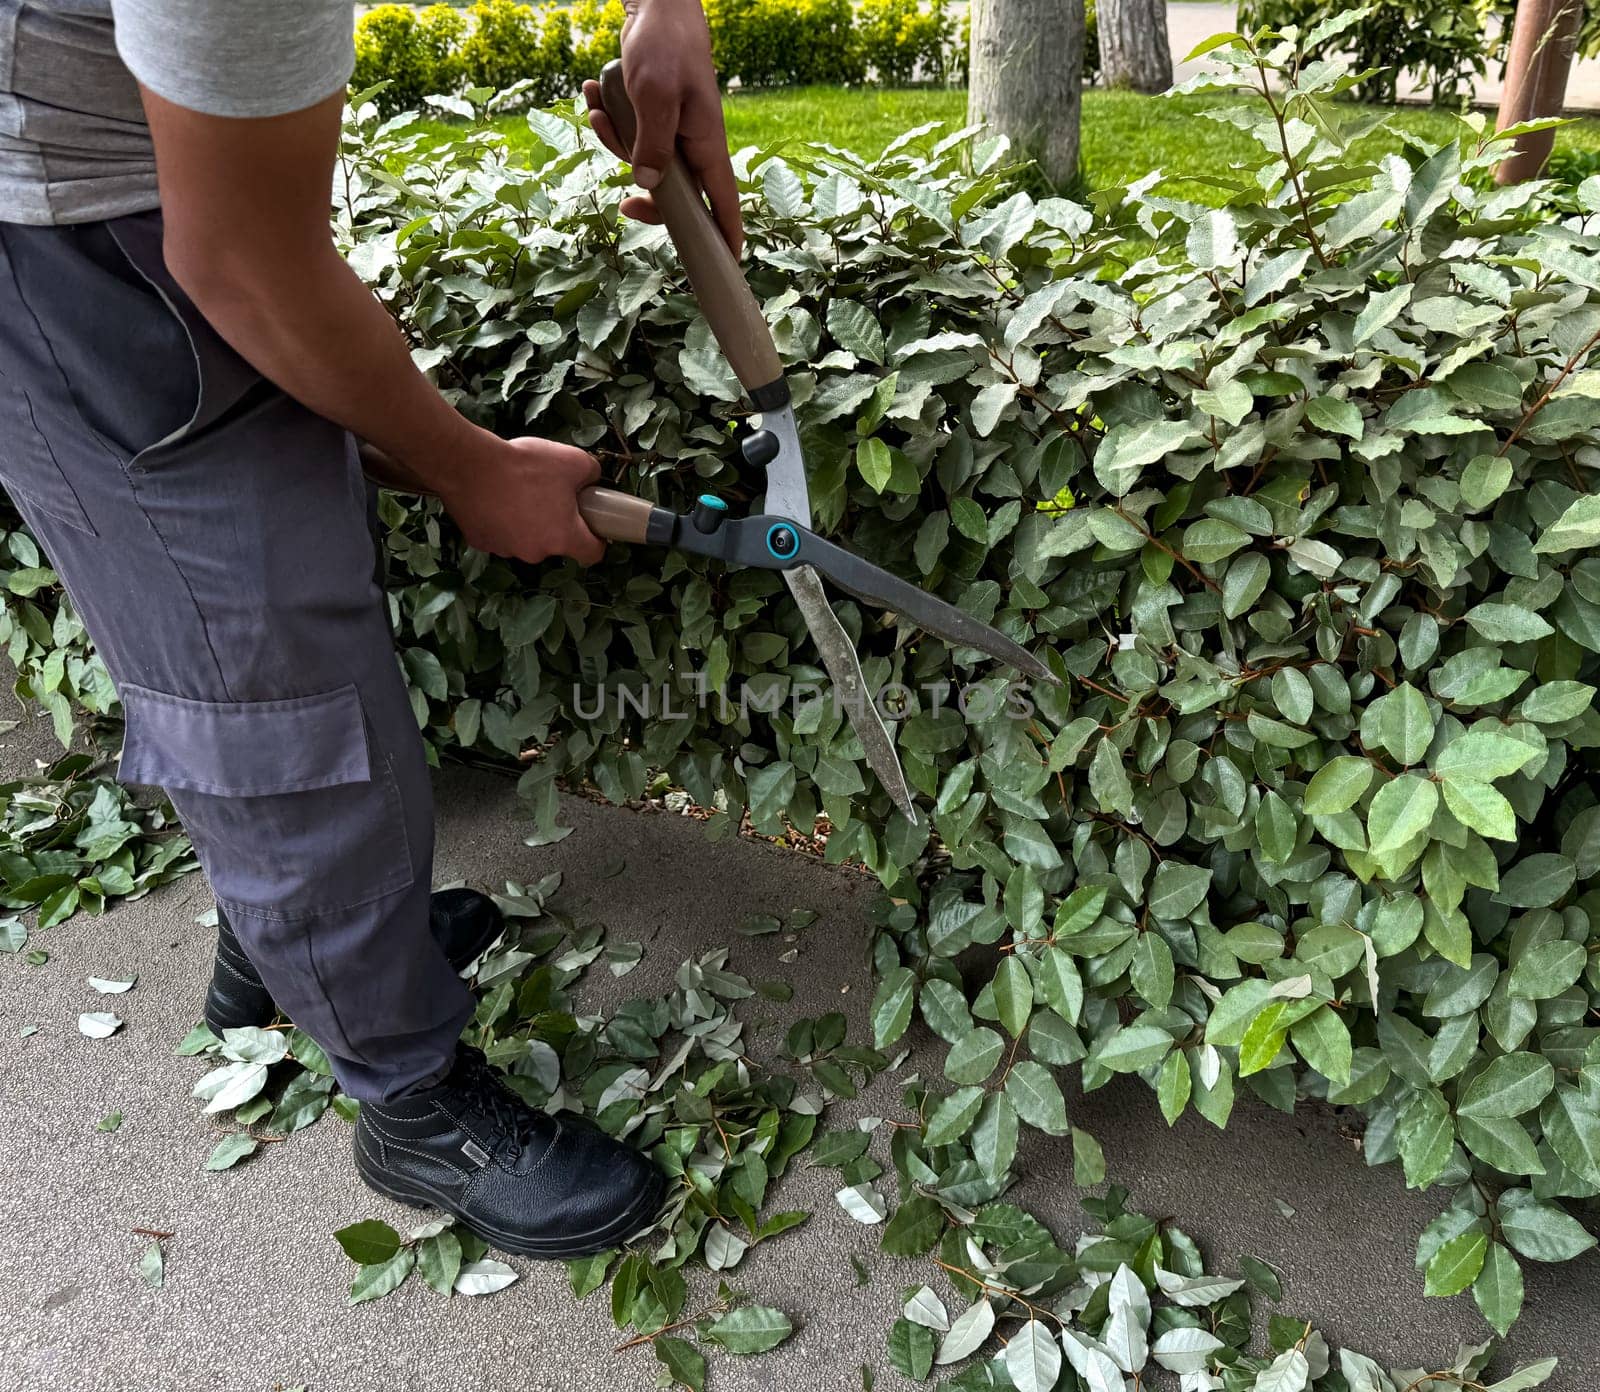 Man using large garden shears to trim green ivy bushes, focusing on plant care and landscape maintenance, with cut leaves scattered on the ground. Gardening activity in detail. High quality photo